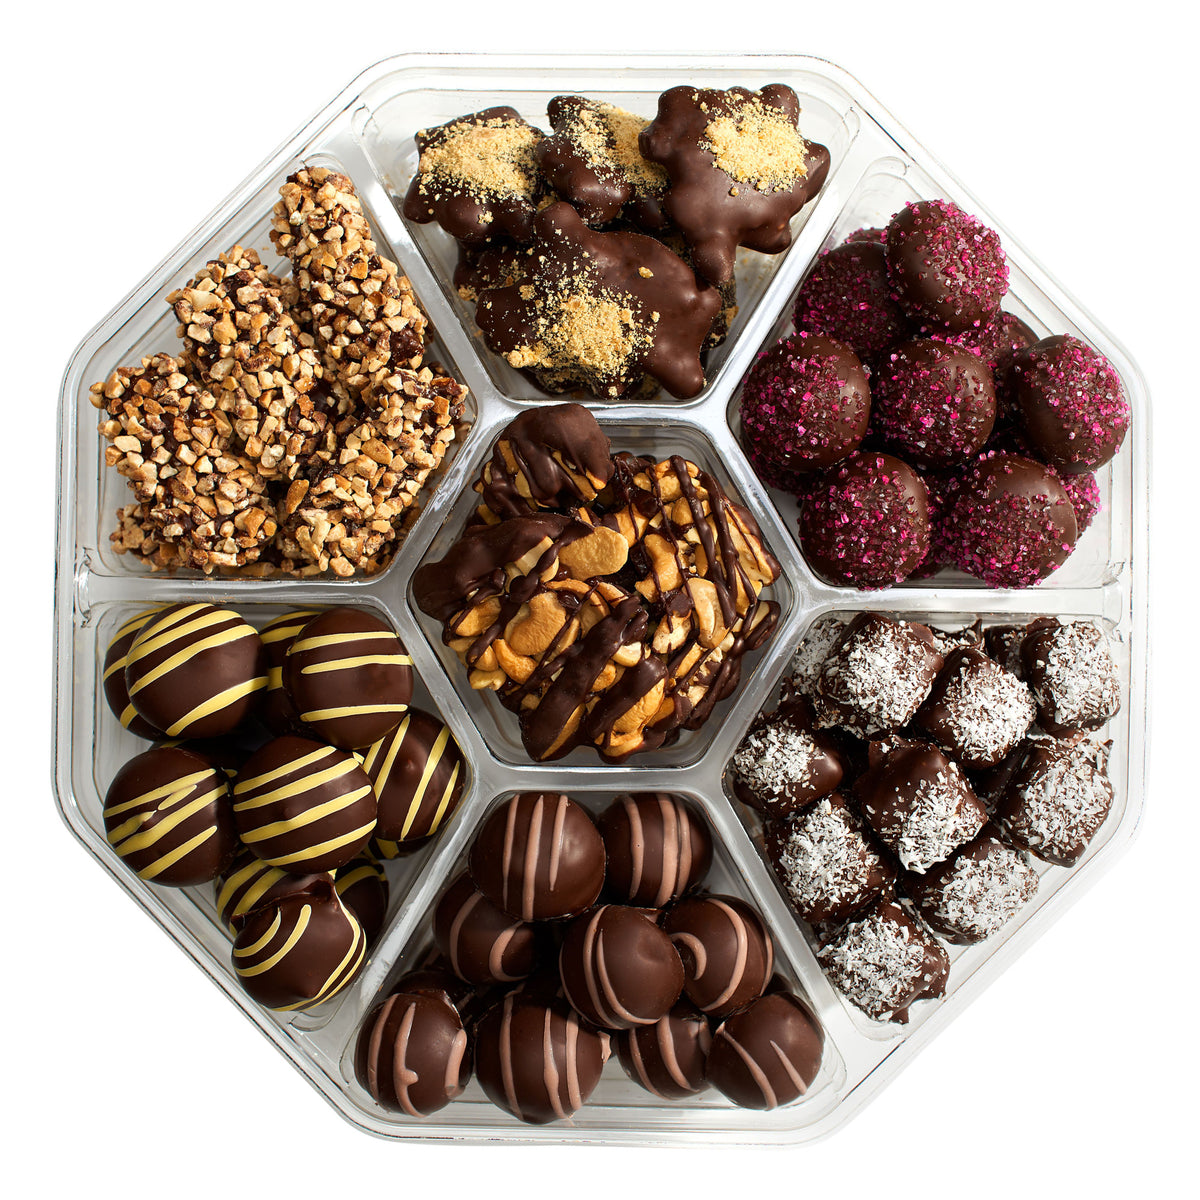 Fames Chocolatier - Mother's Day Chocolate Gift Assortment, Kosher, Dairy Free.  Fames Chocolate